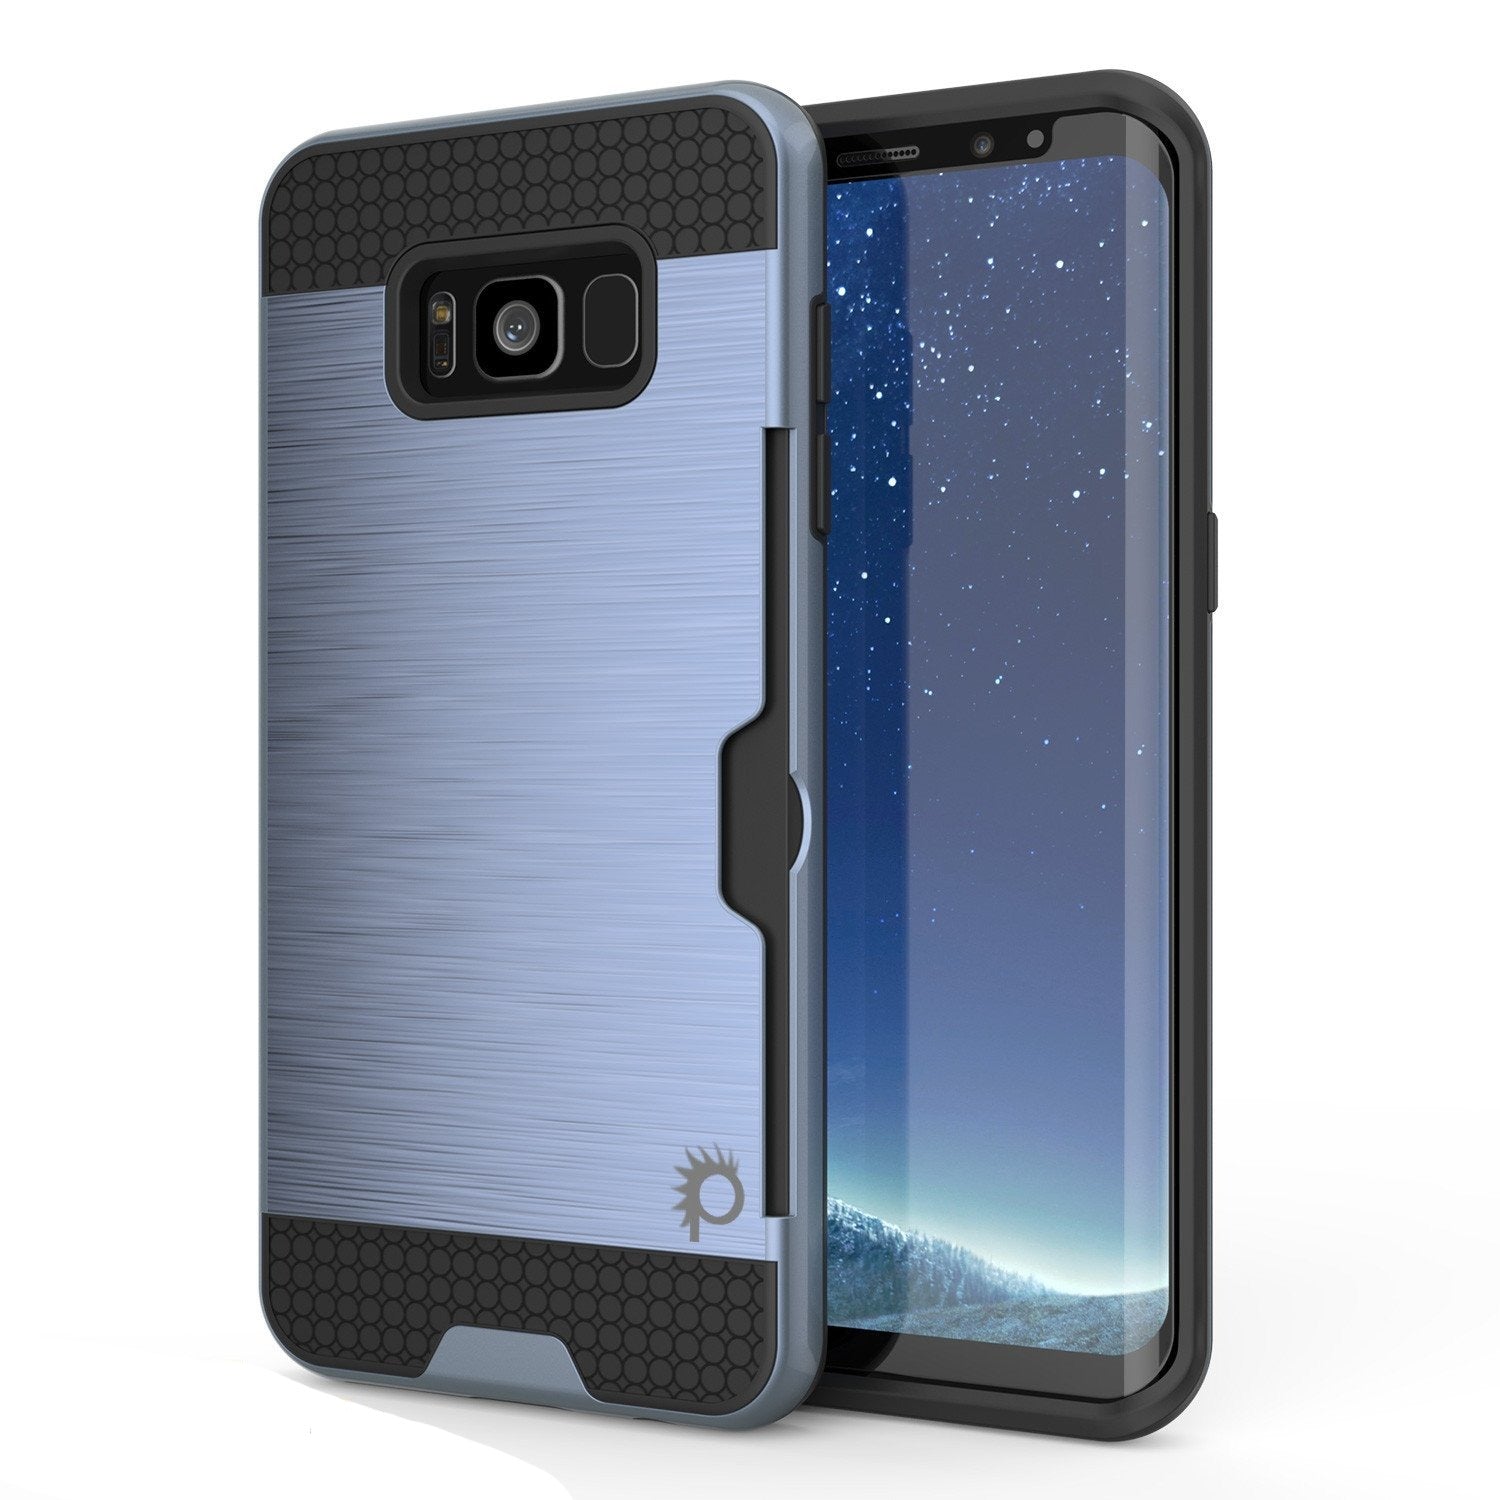 Galaxy S8 Plus Case, PUNKcase [SLOT Series] [Slim Fit] Dual-Layer Armor Cover w/Integrated Anti-Shock System, Credit Card Slot & PunkShield Screen Protector for Samsung Galaxy S8+ [Navy]